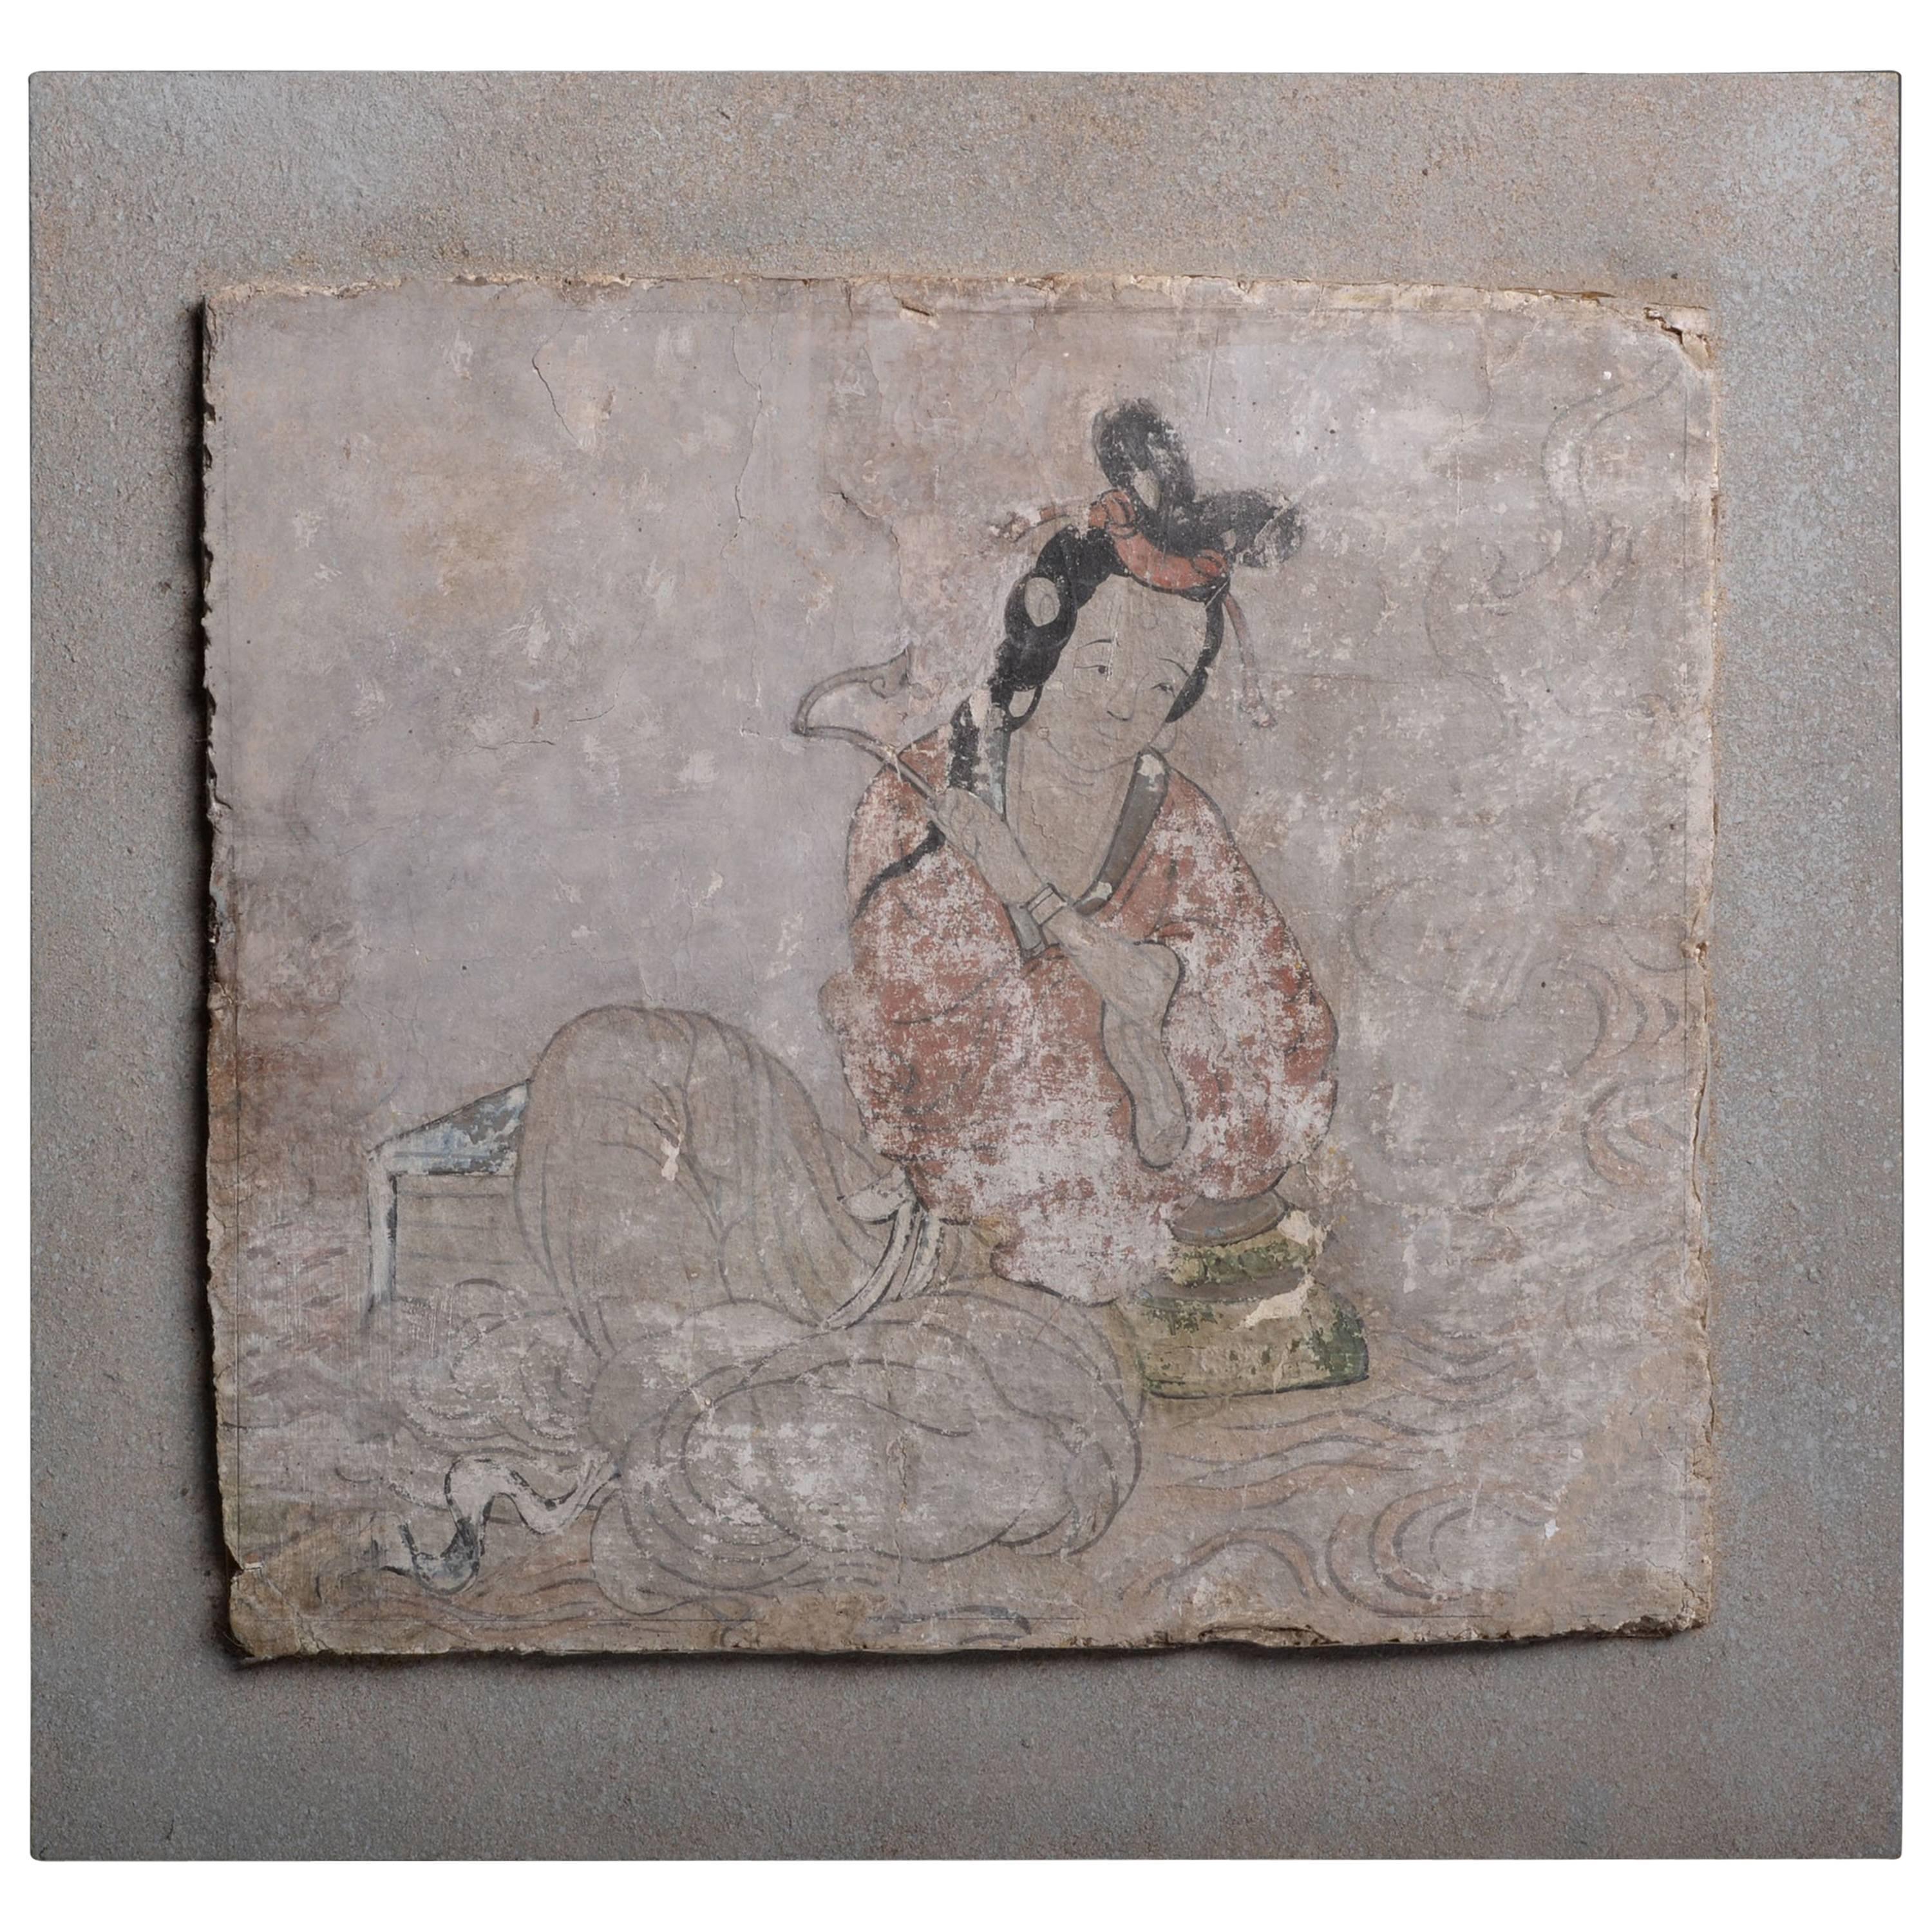 Ancient Chinese Tang Dynasty Stucco Fresco Panel, 700 AD